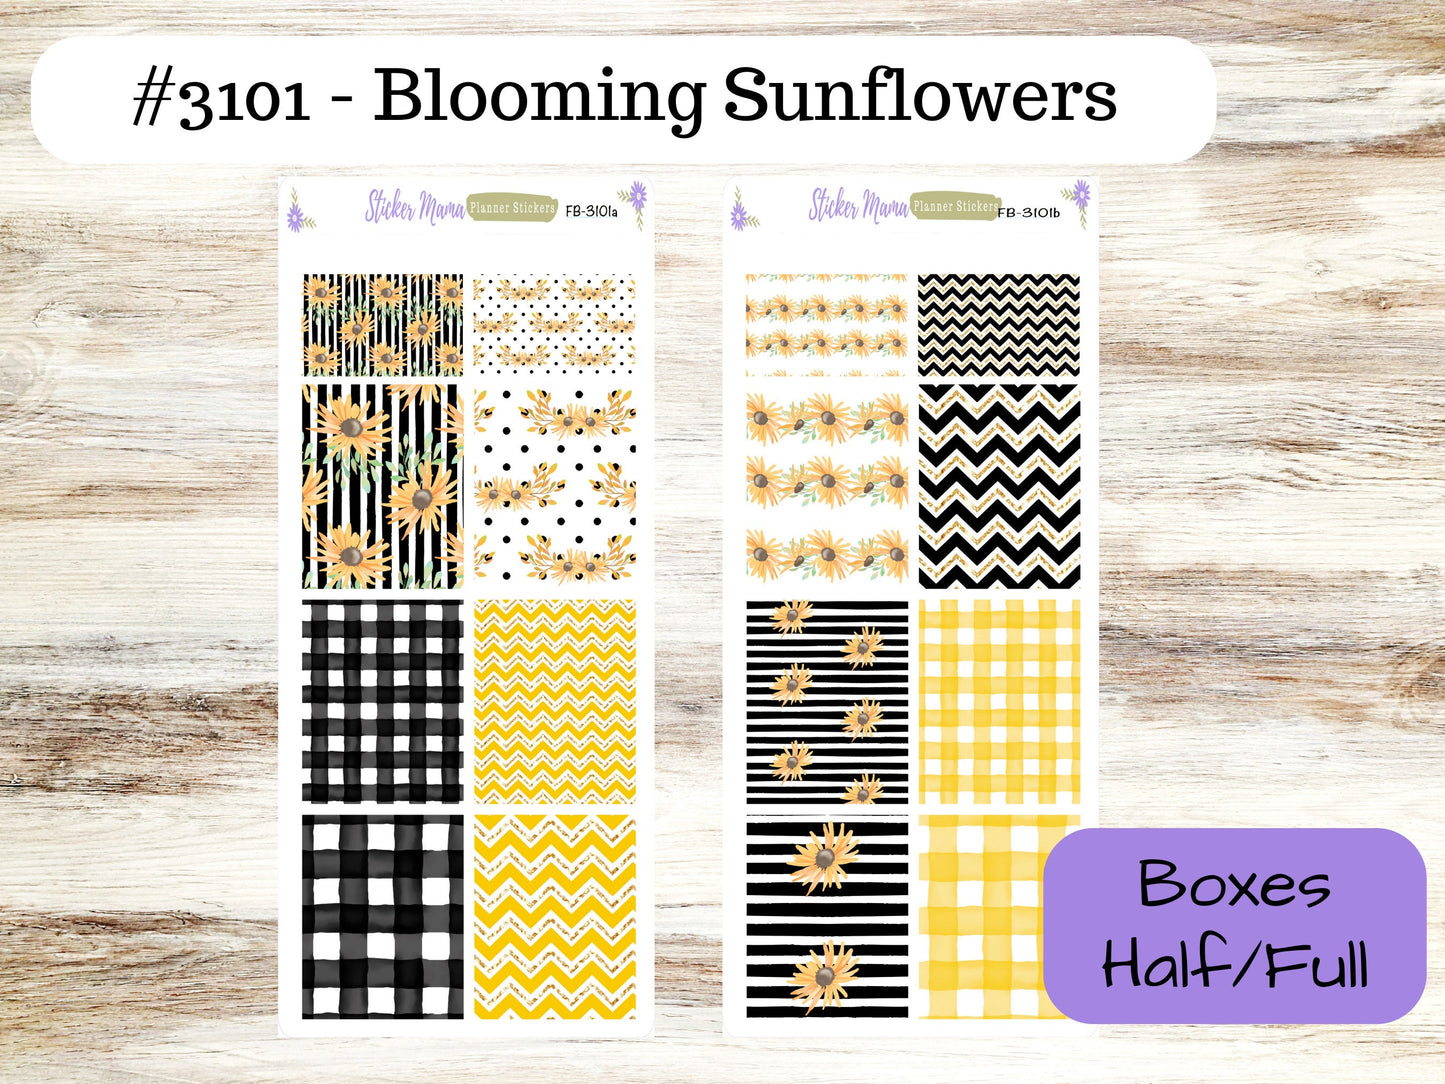 FULL BOXES-3101 || Blooming Sunflowers || Planner Stickers -|| Full Box for Planners